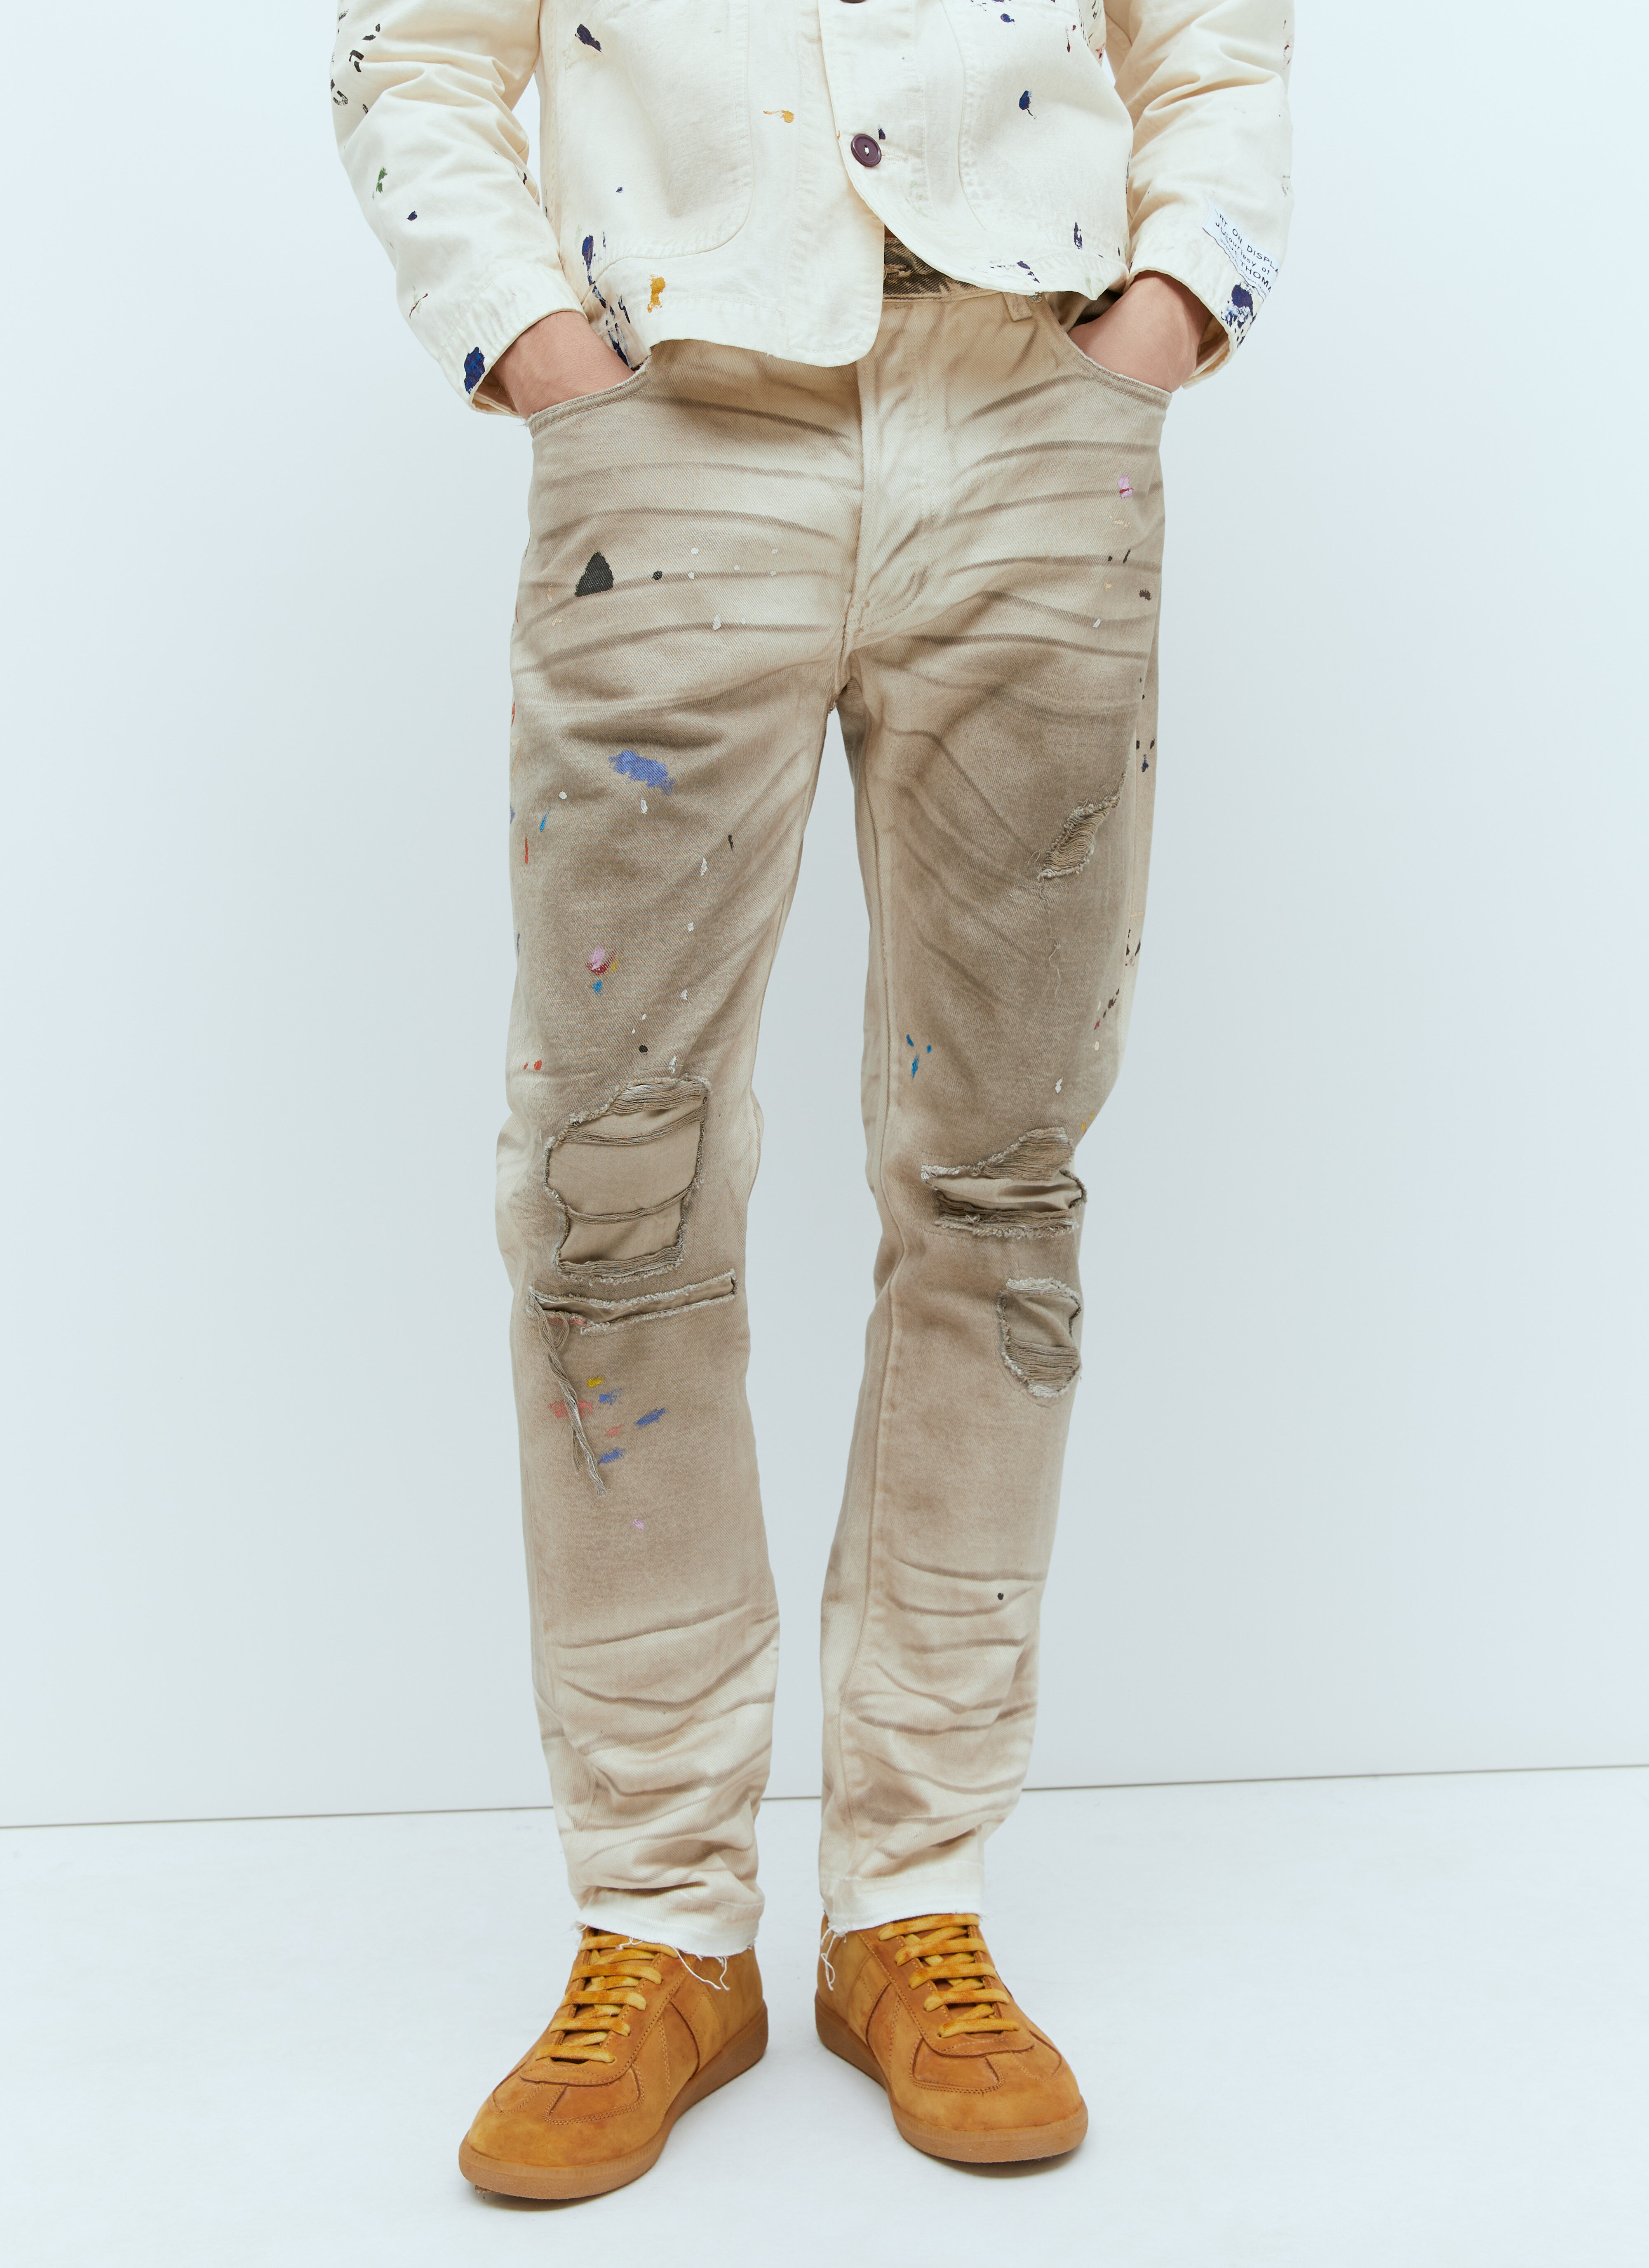 Gallery Dept. Hollywood BLV 5001 Jeans White gdp0153039